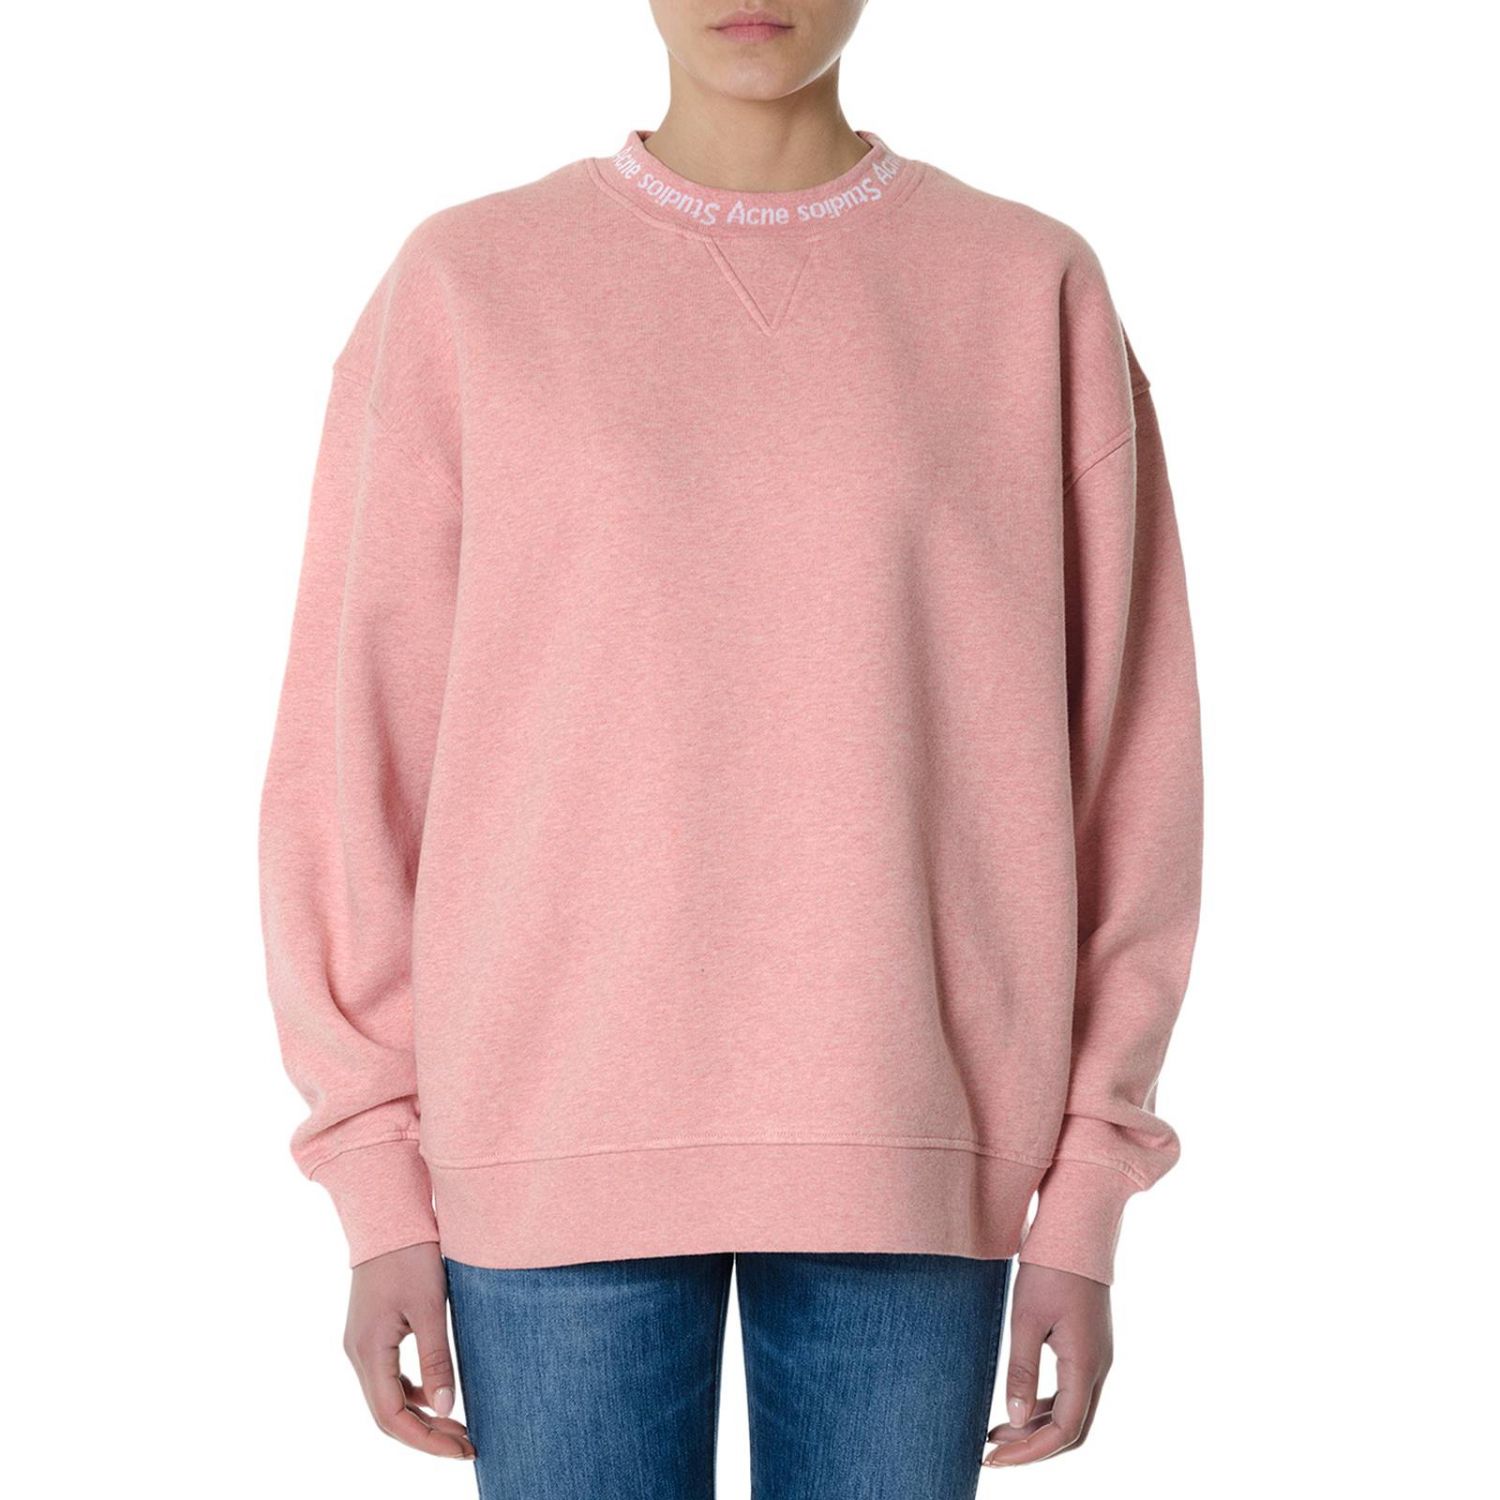 Acne Studios Outlet: Sweater women 